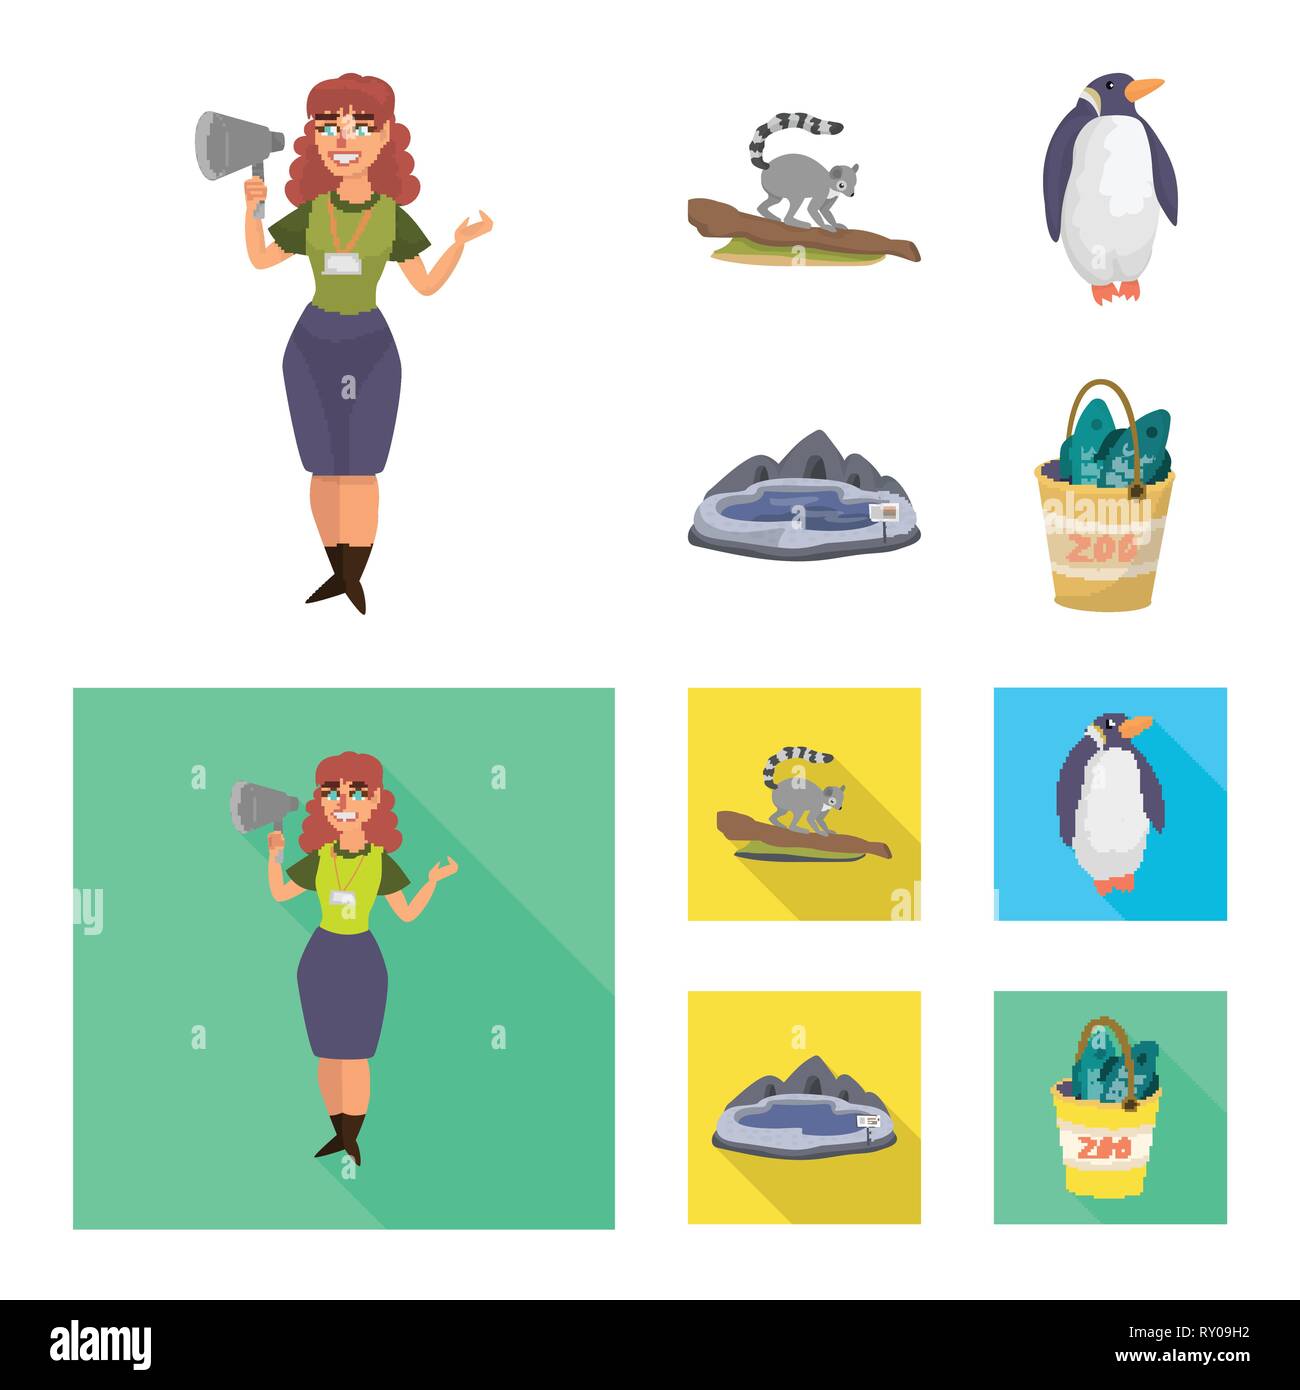 zookeeper,lemur,penguin,lake,bucket,woman,monkey,white,pool,fish,megaphone,Africa,cute,water,full,worker,tree,wild,stone,fishing,keeper,tropical,north,swimming,crucian,message,winter,pond,carp,utensil,nature,fun,fauna,entertainment,zoo,park,safari,animal,forest,flora,set,vector,icon,illustration,isolated,collection,design,element,graphic,sign Vector Vectors , Stock Vector